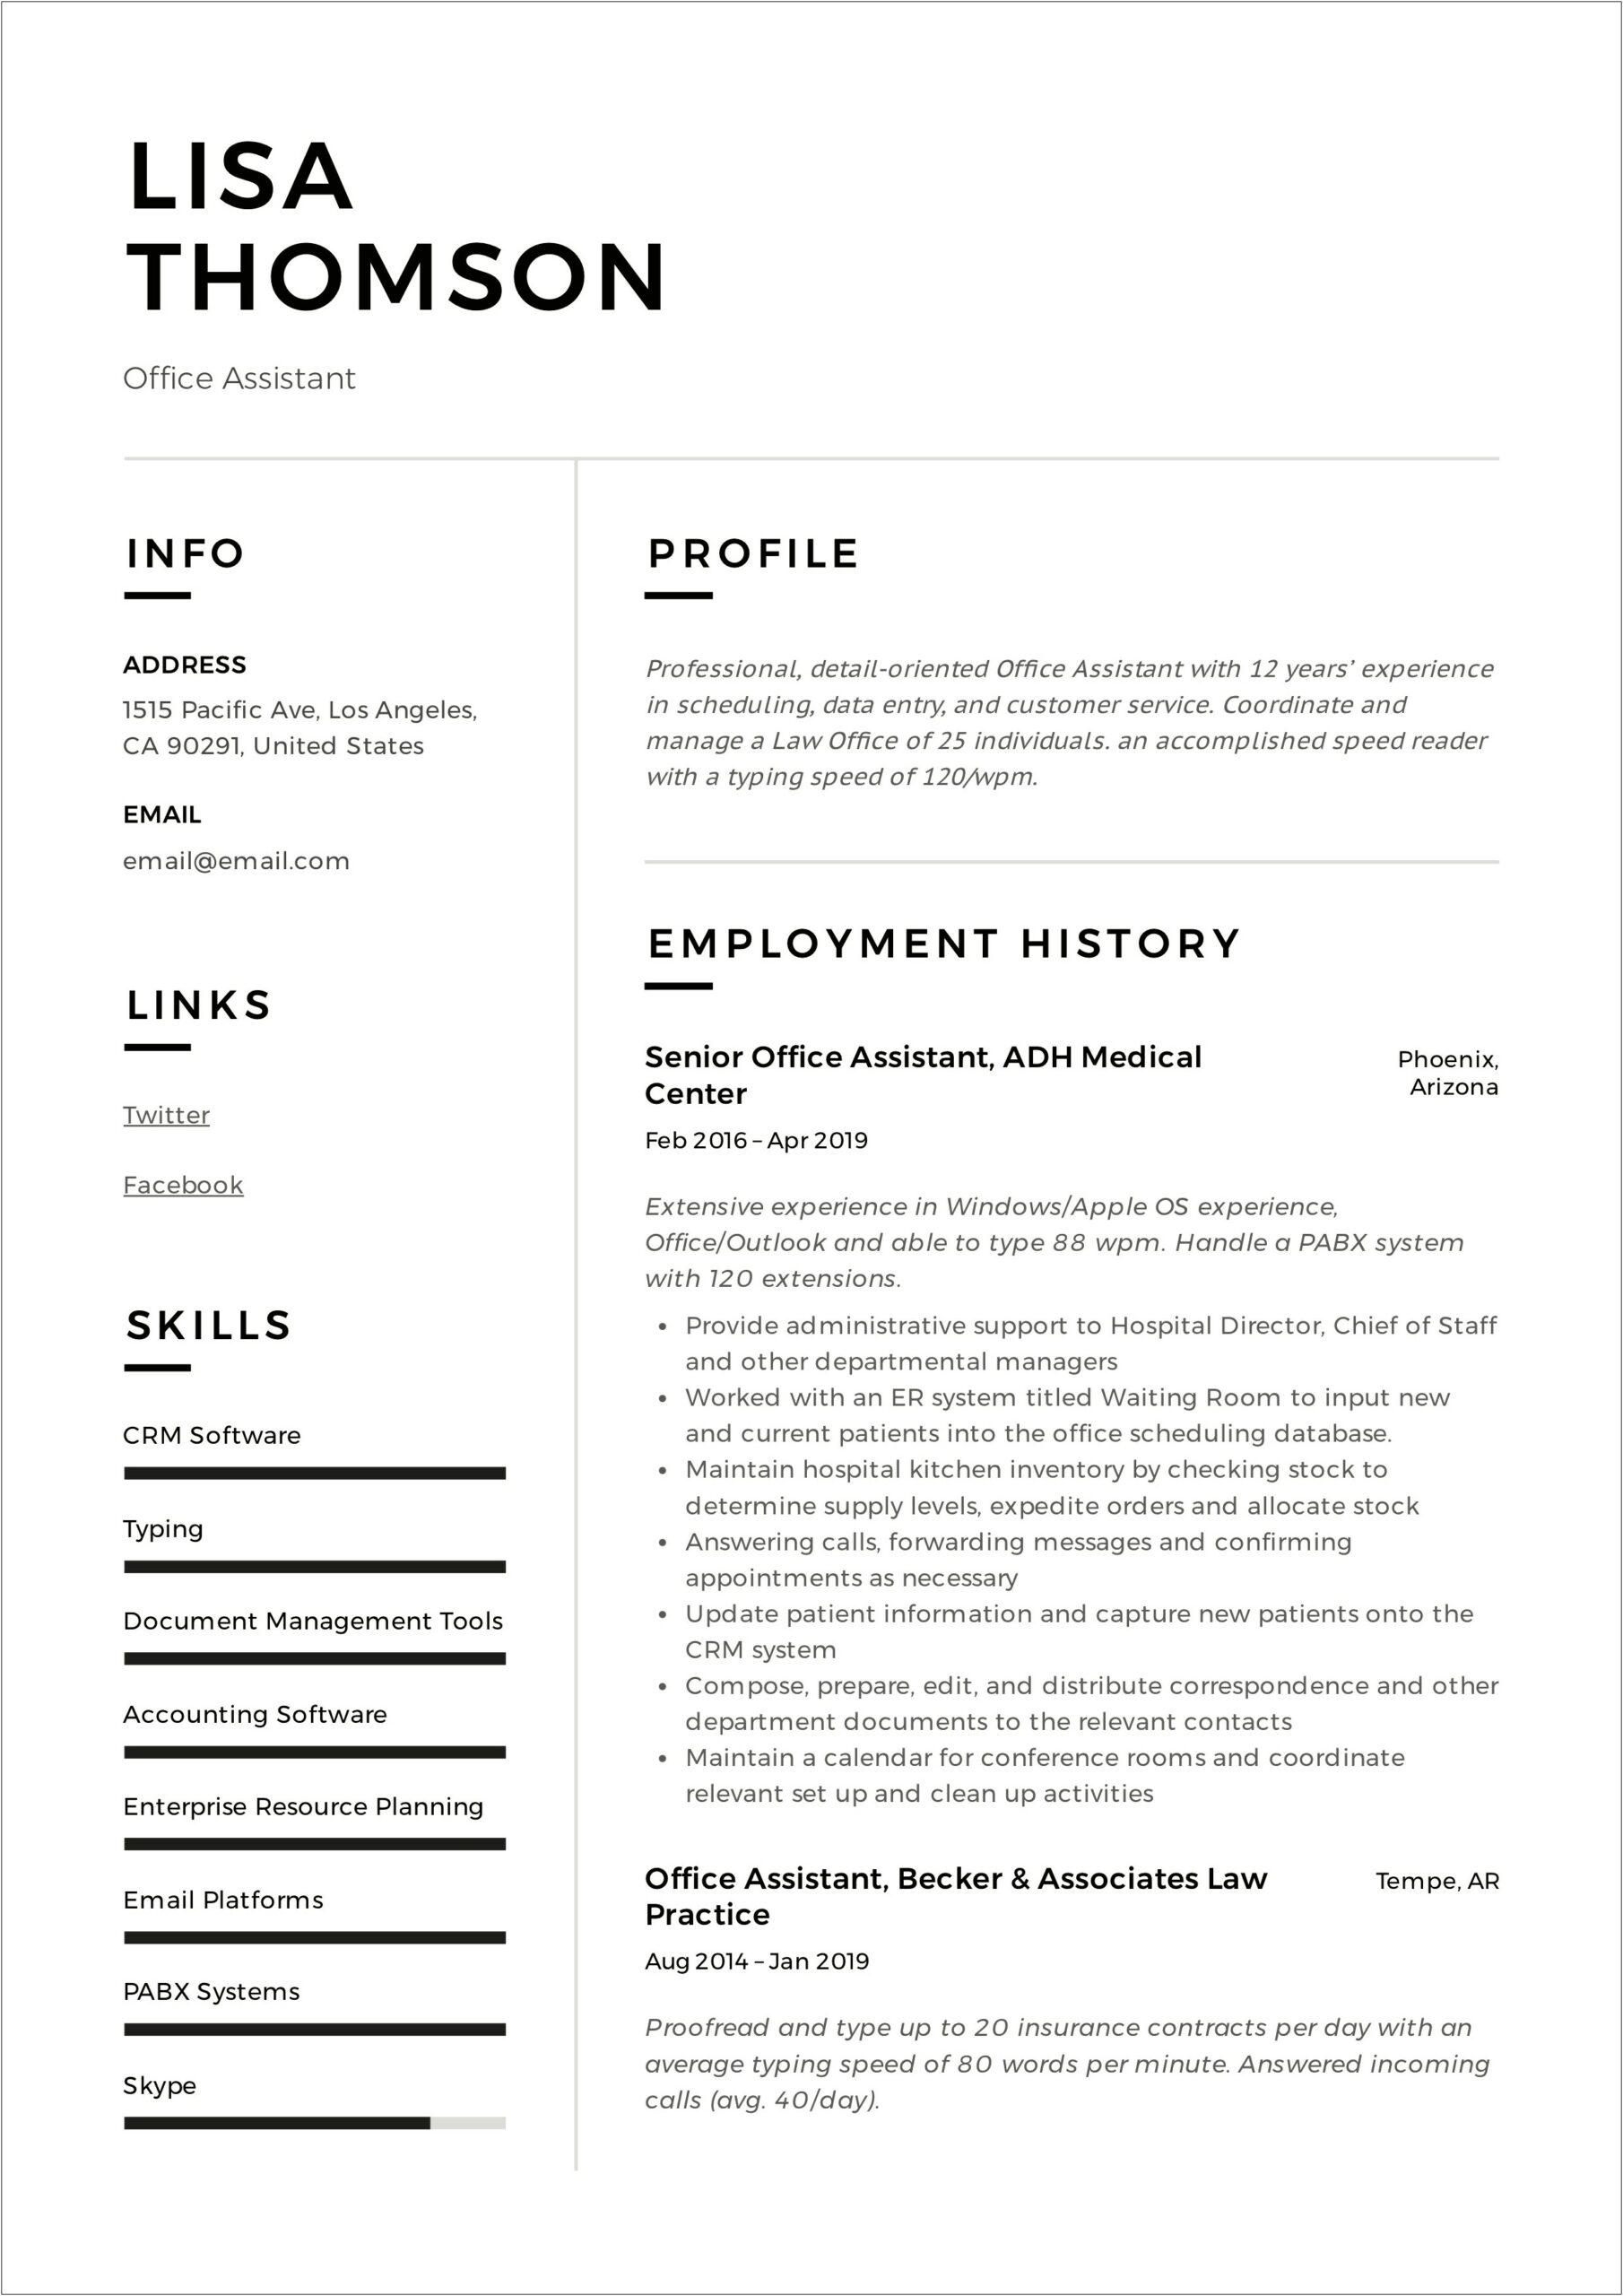 Resume Summary Examples For Office Assistant